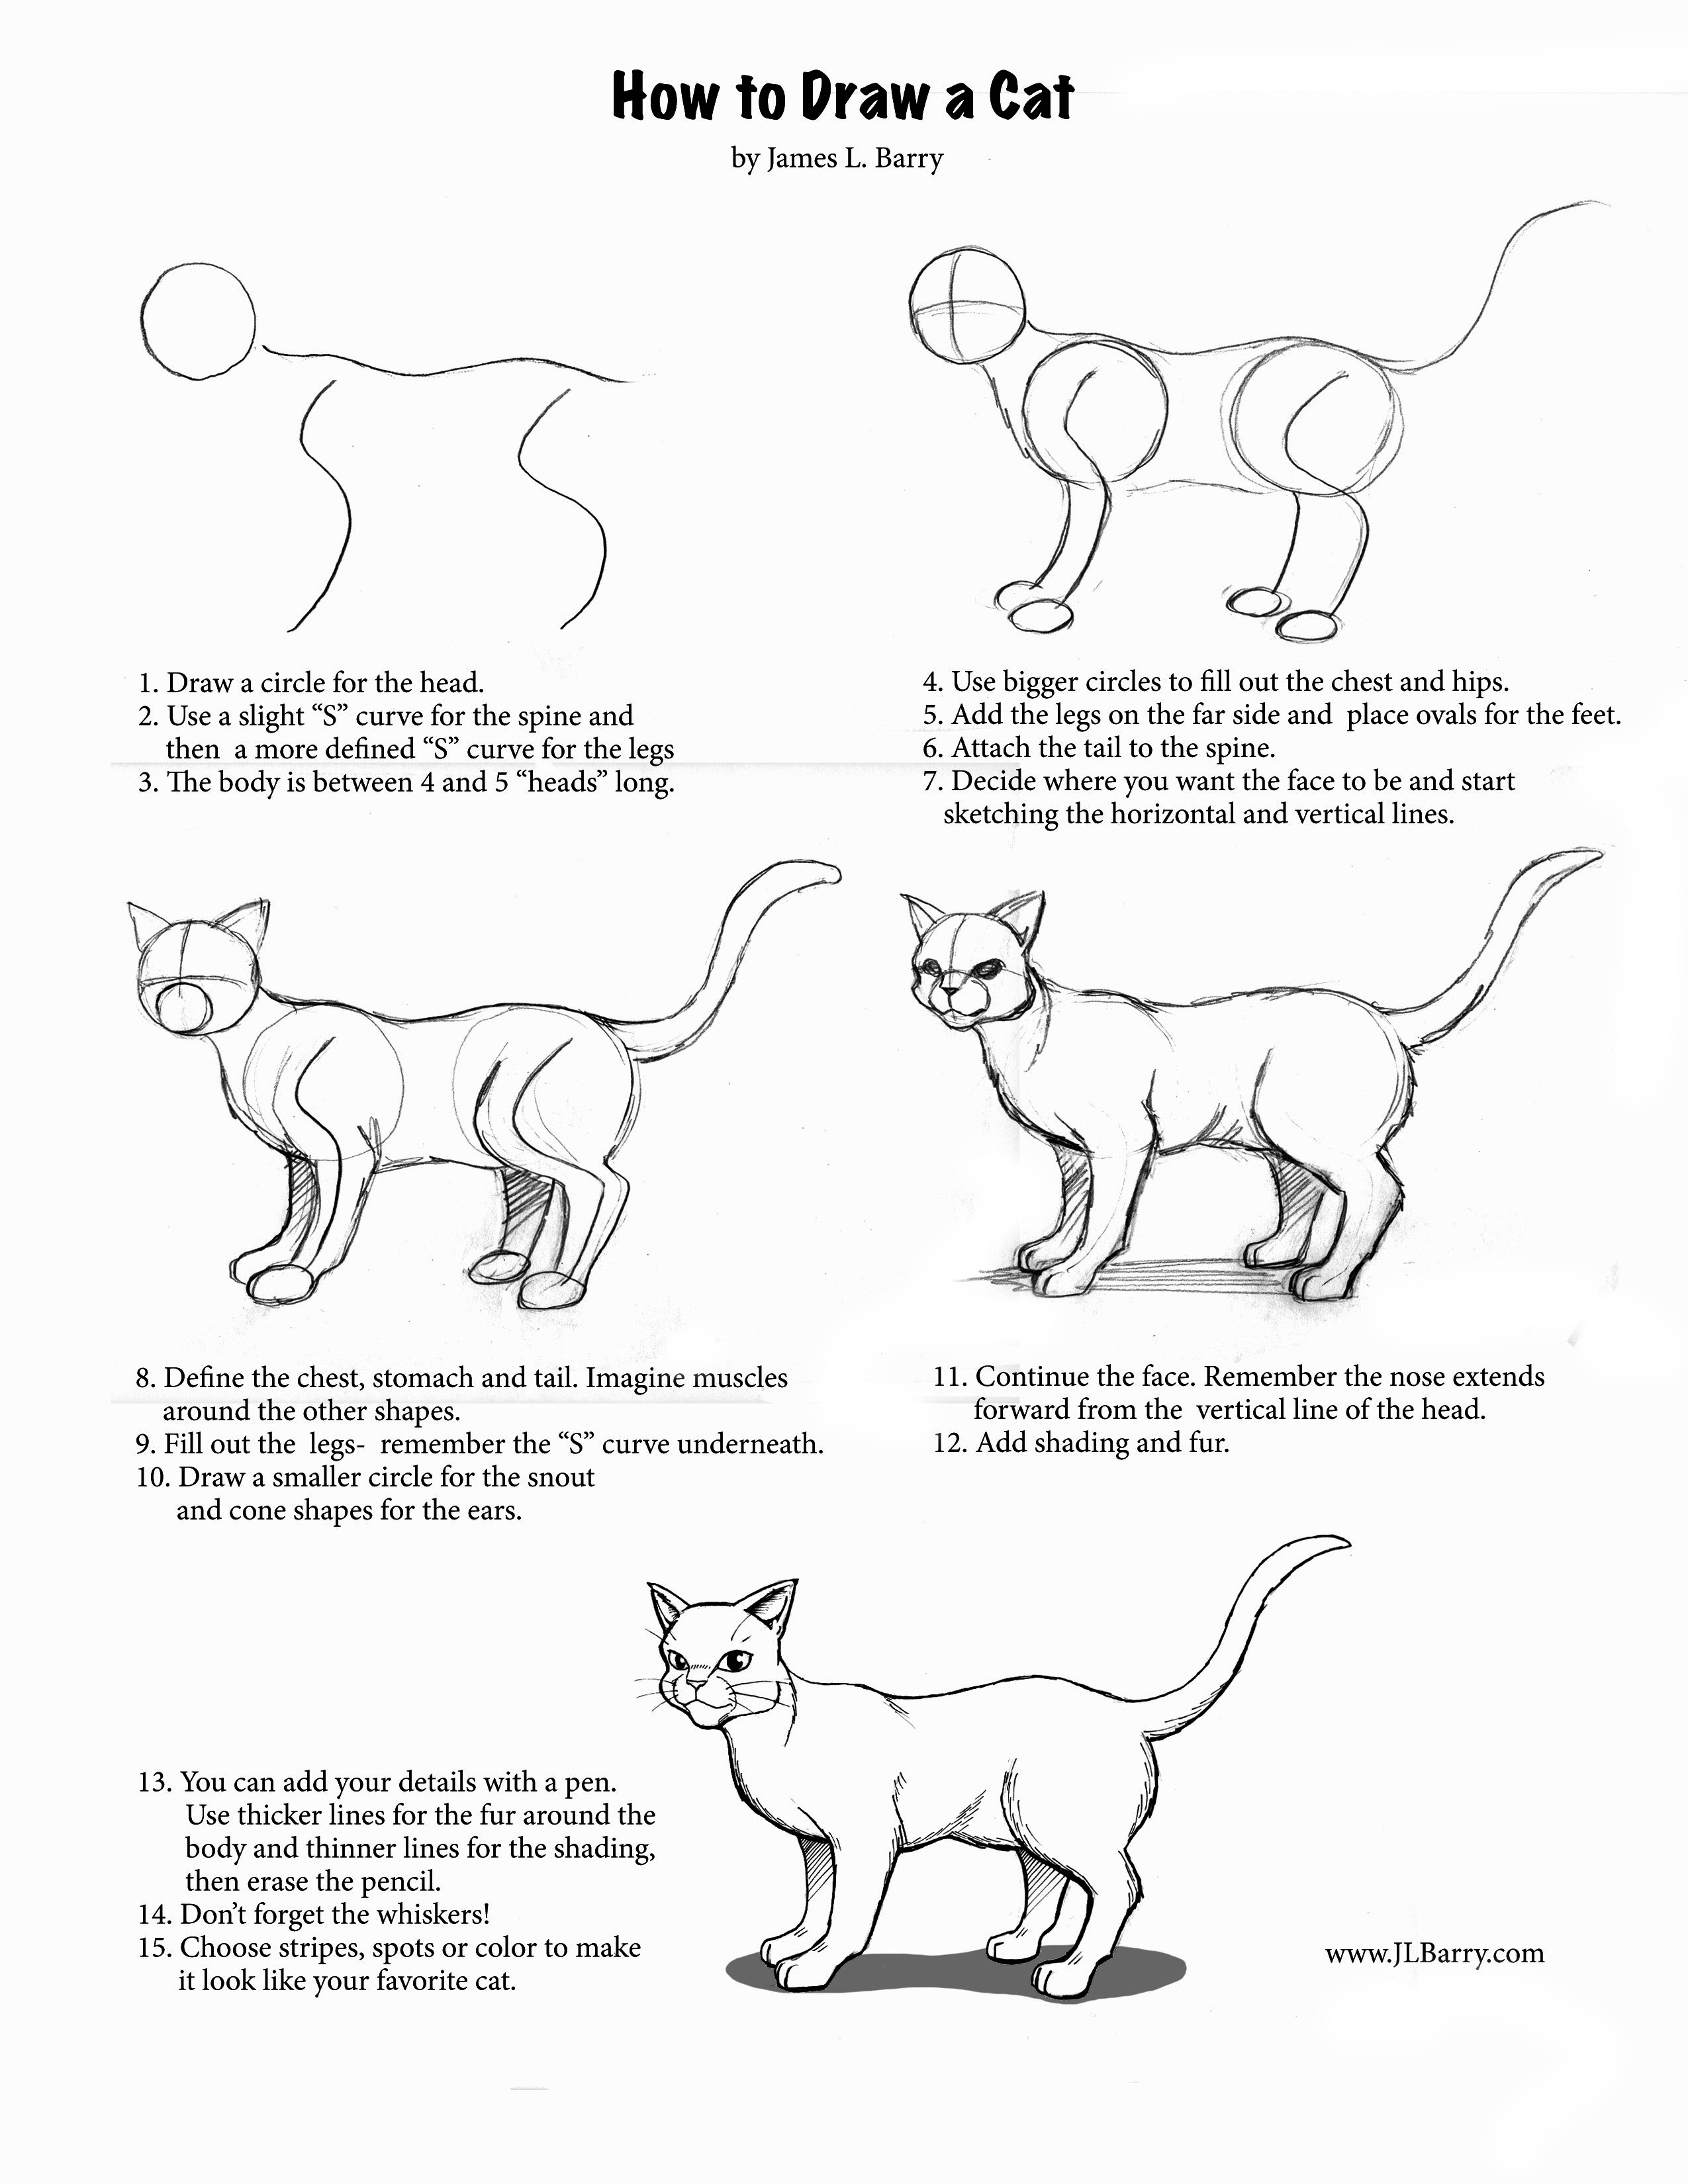 How To Draw A Cat Quick